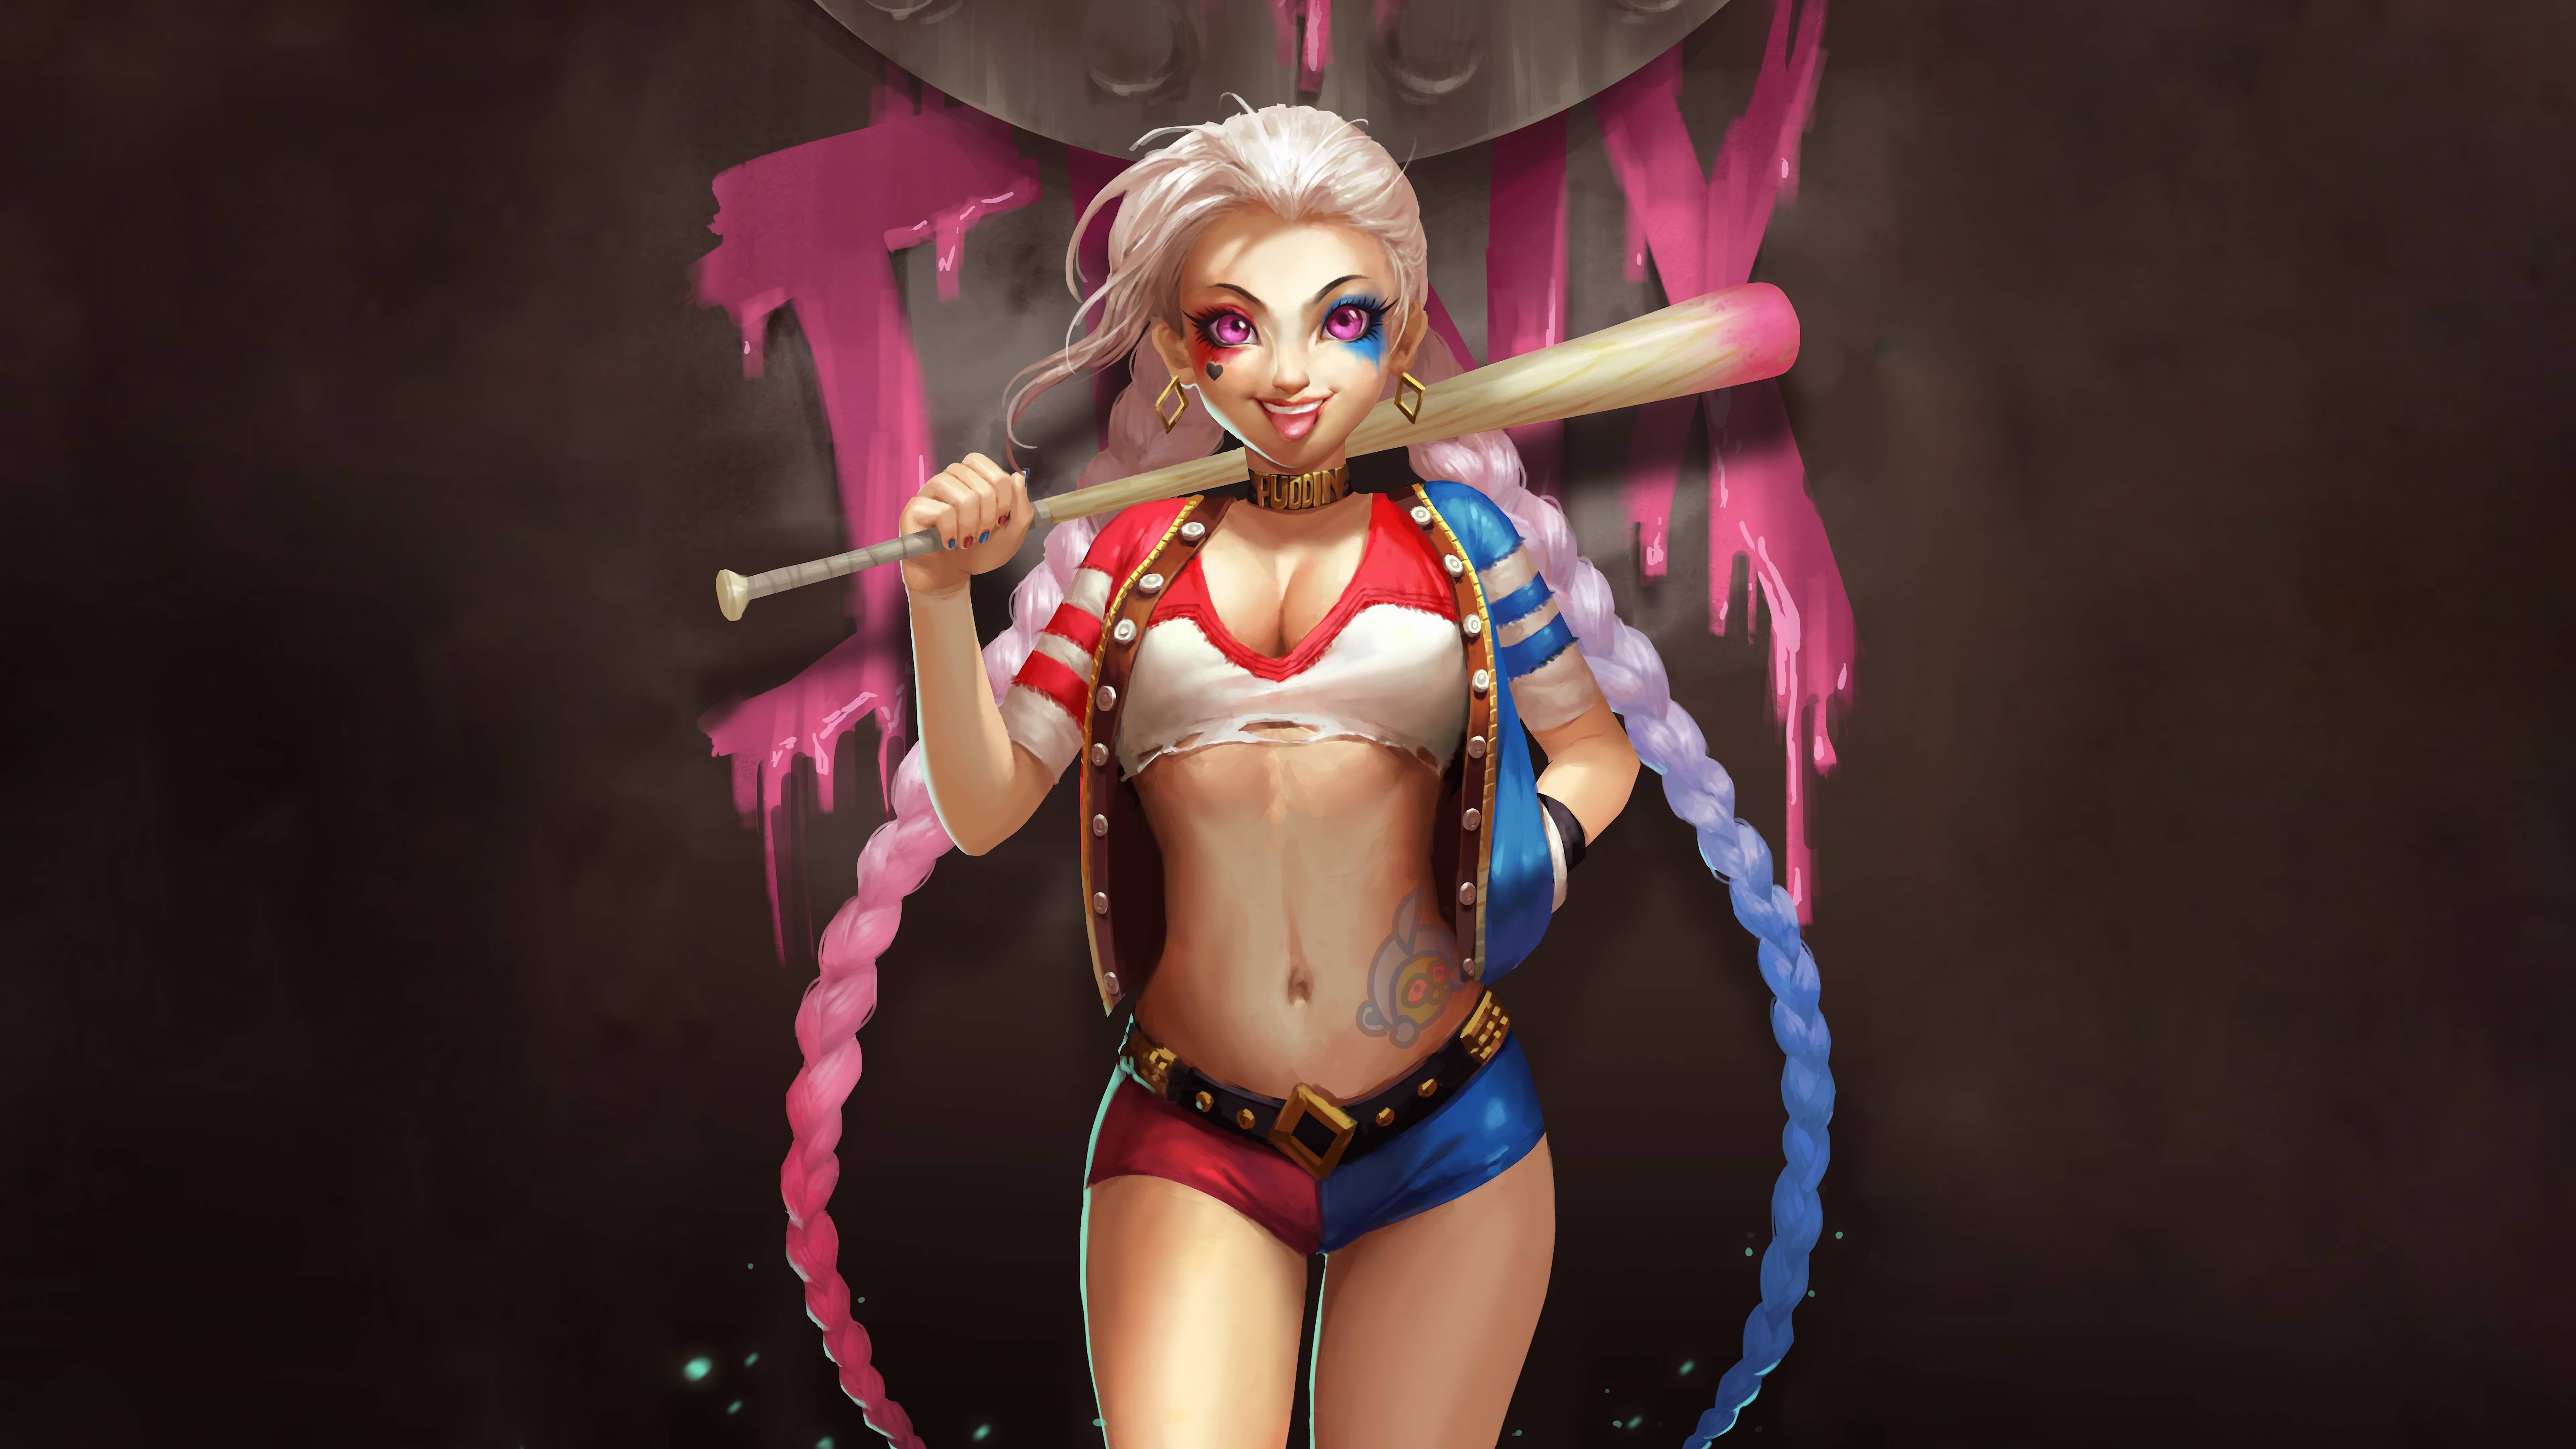 harley quinn wallpaper,cg artwork,pink,action figure,fictional character,toy